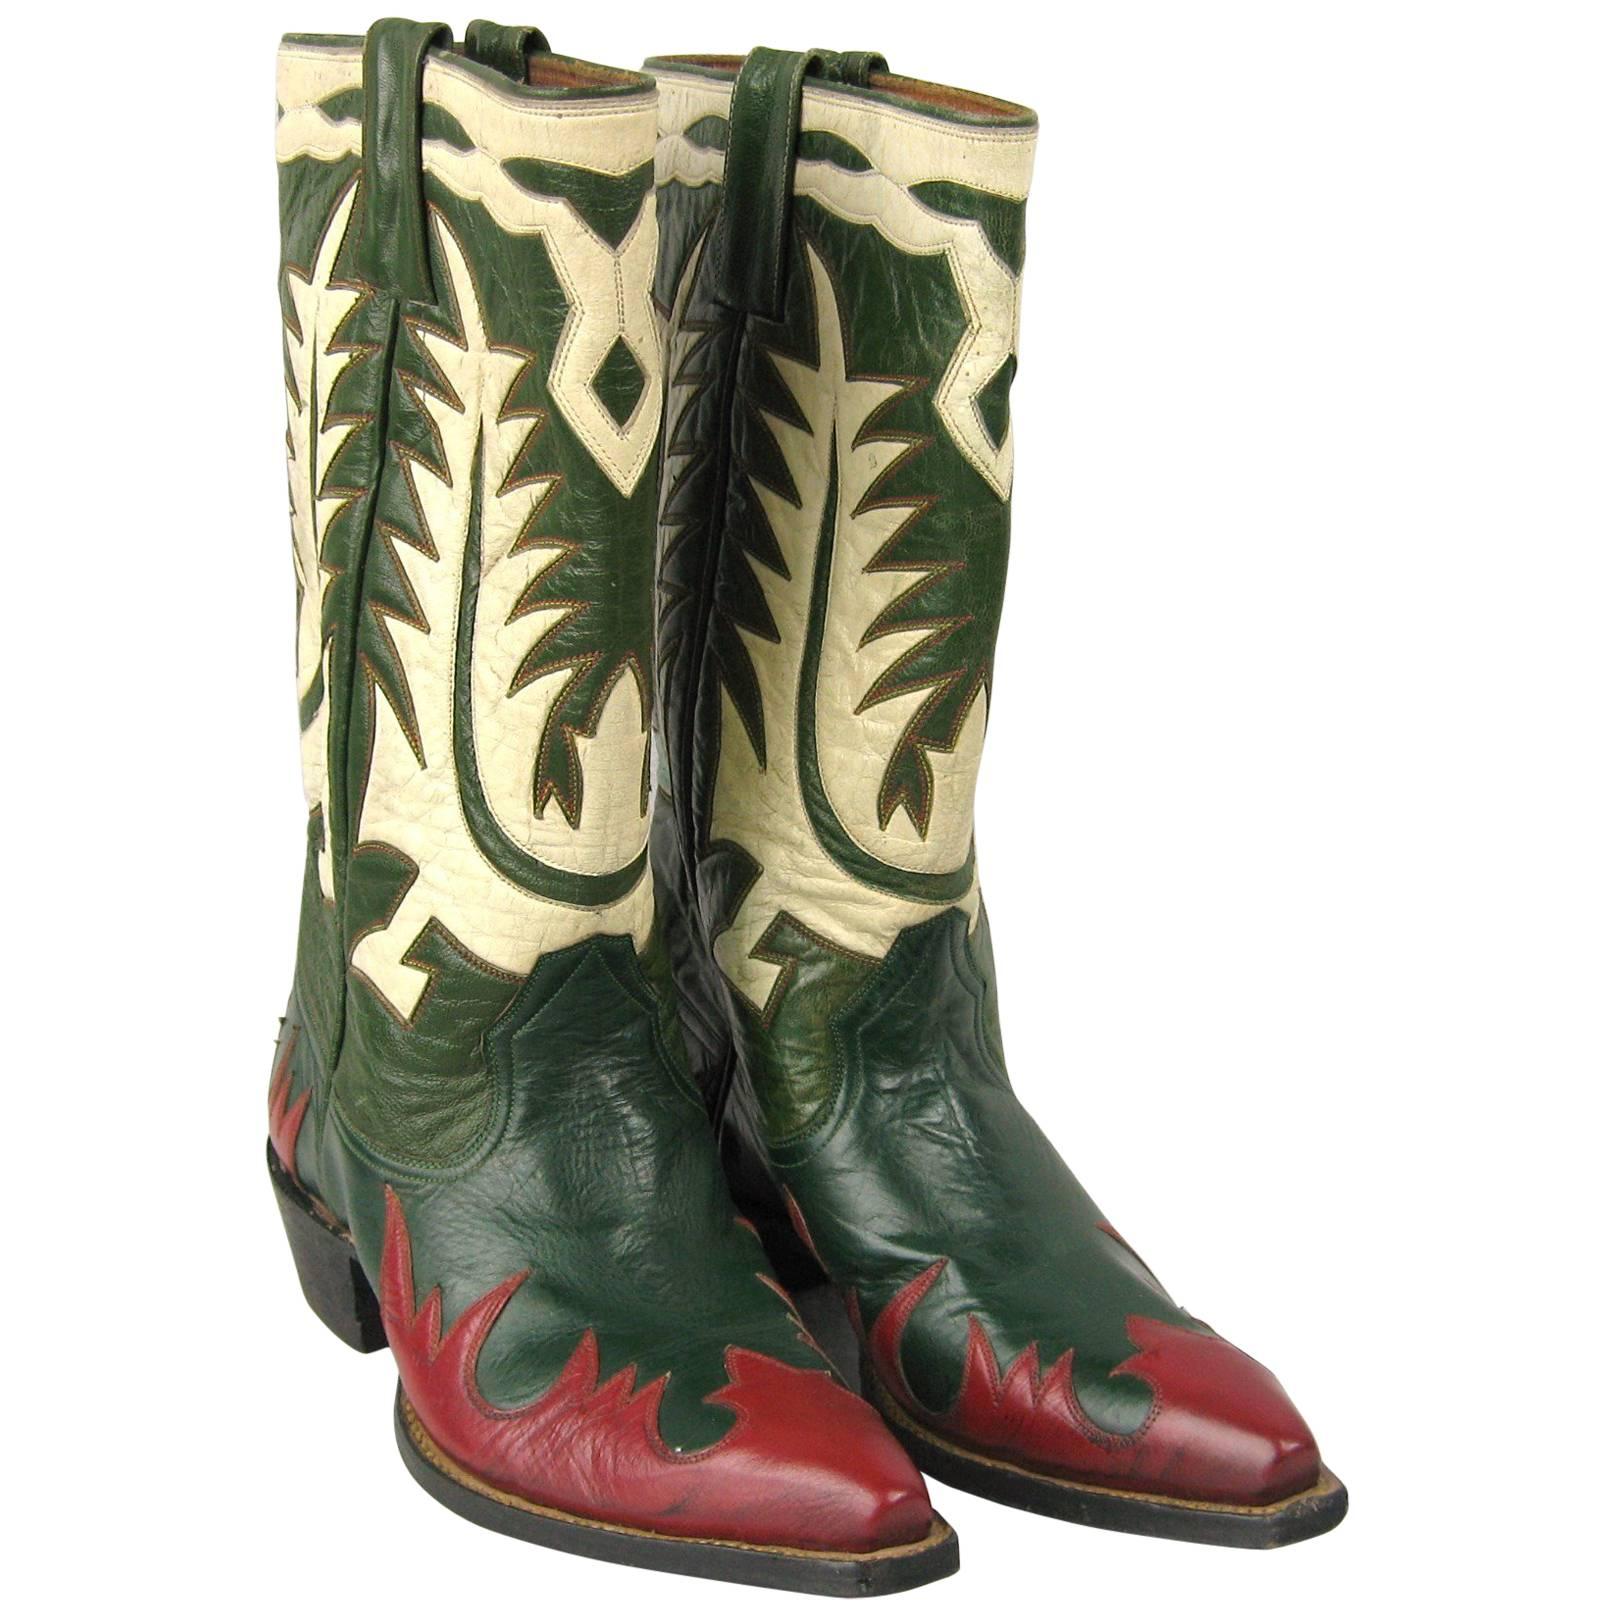 1950s Hand made Green Red White Leather Cowboy Boots 6.5 